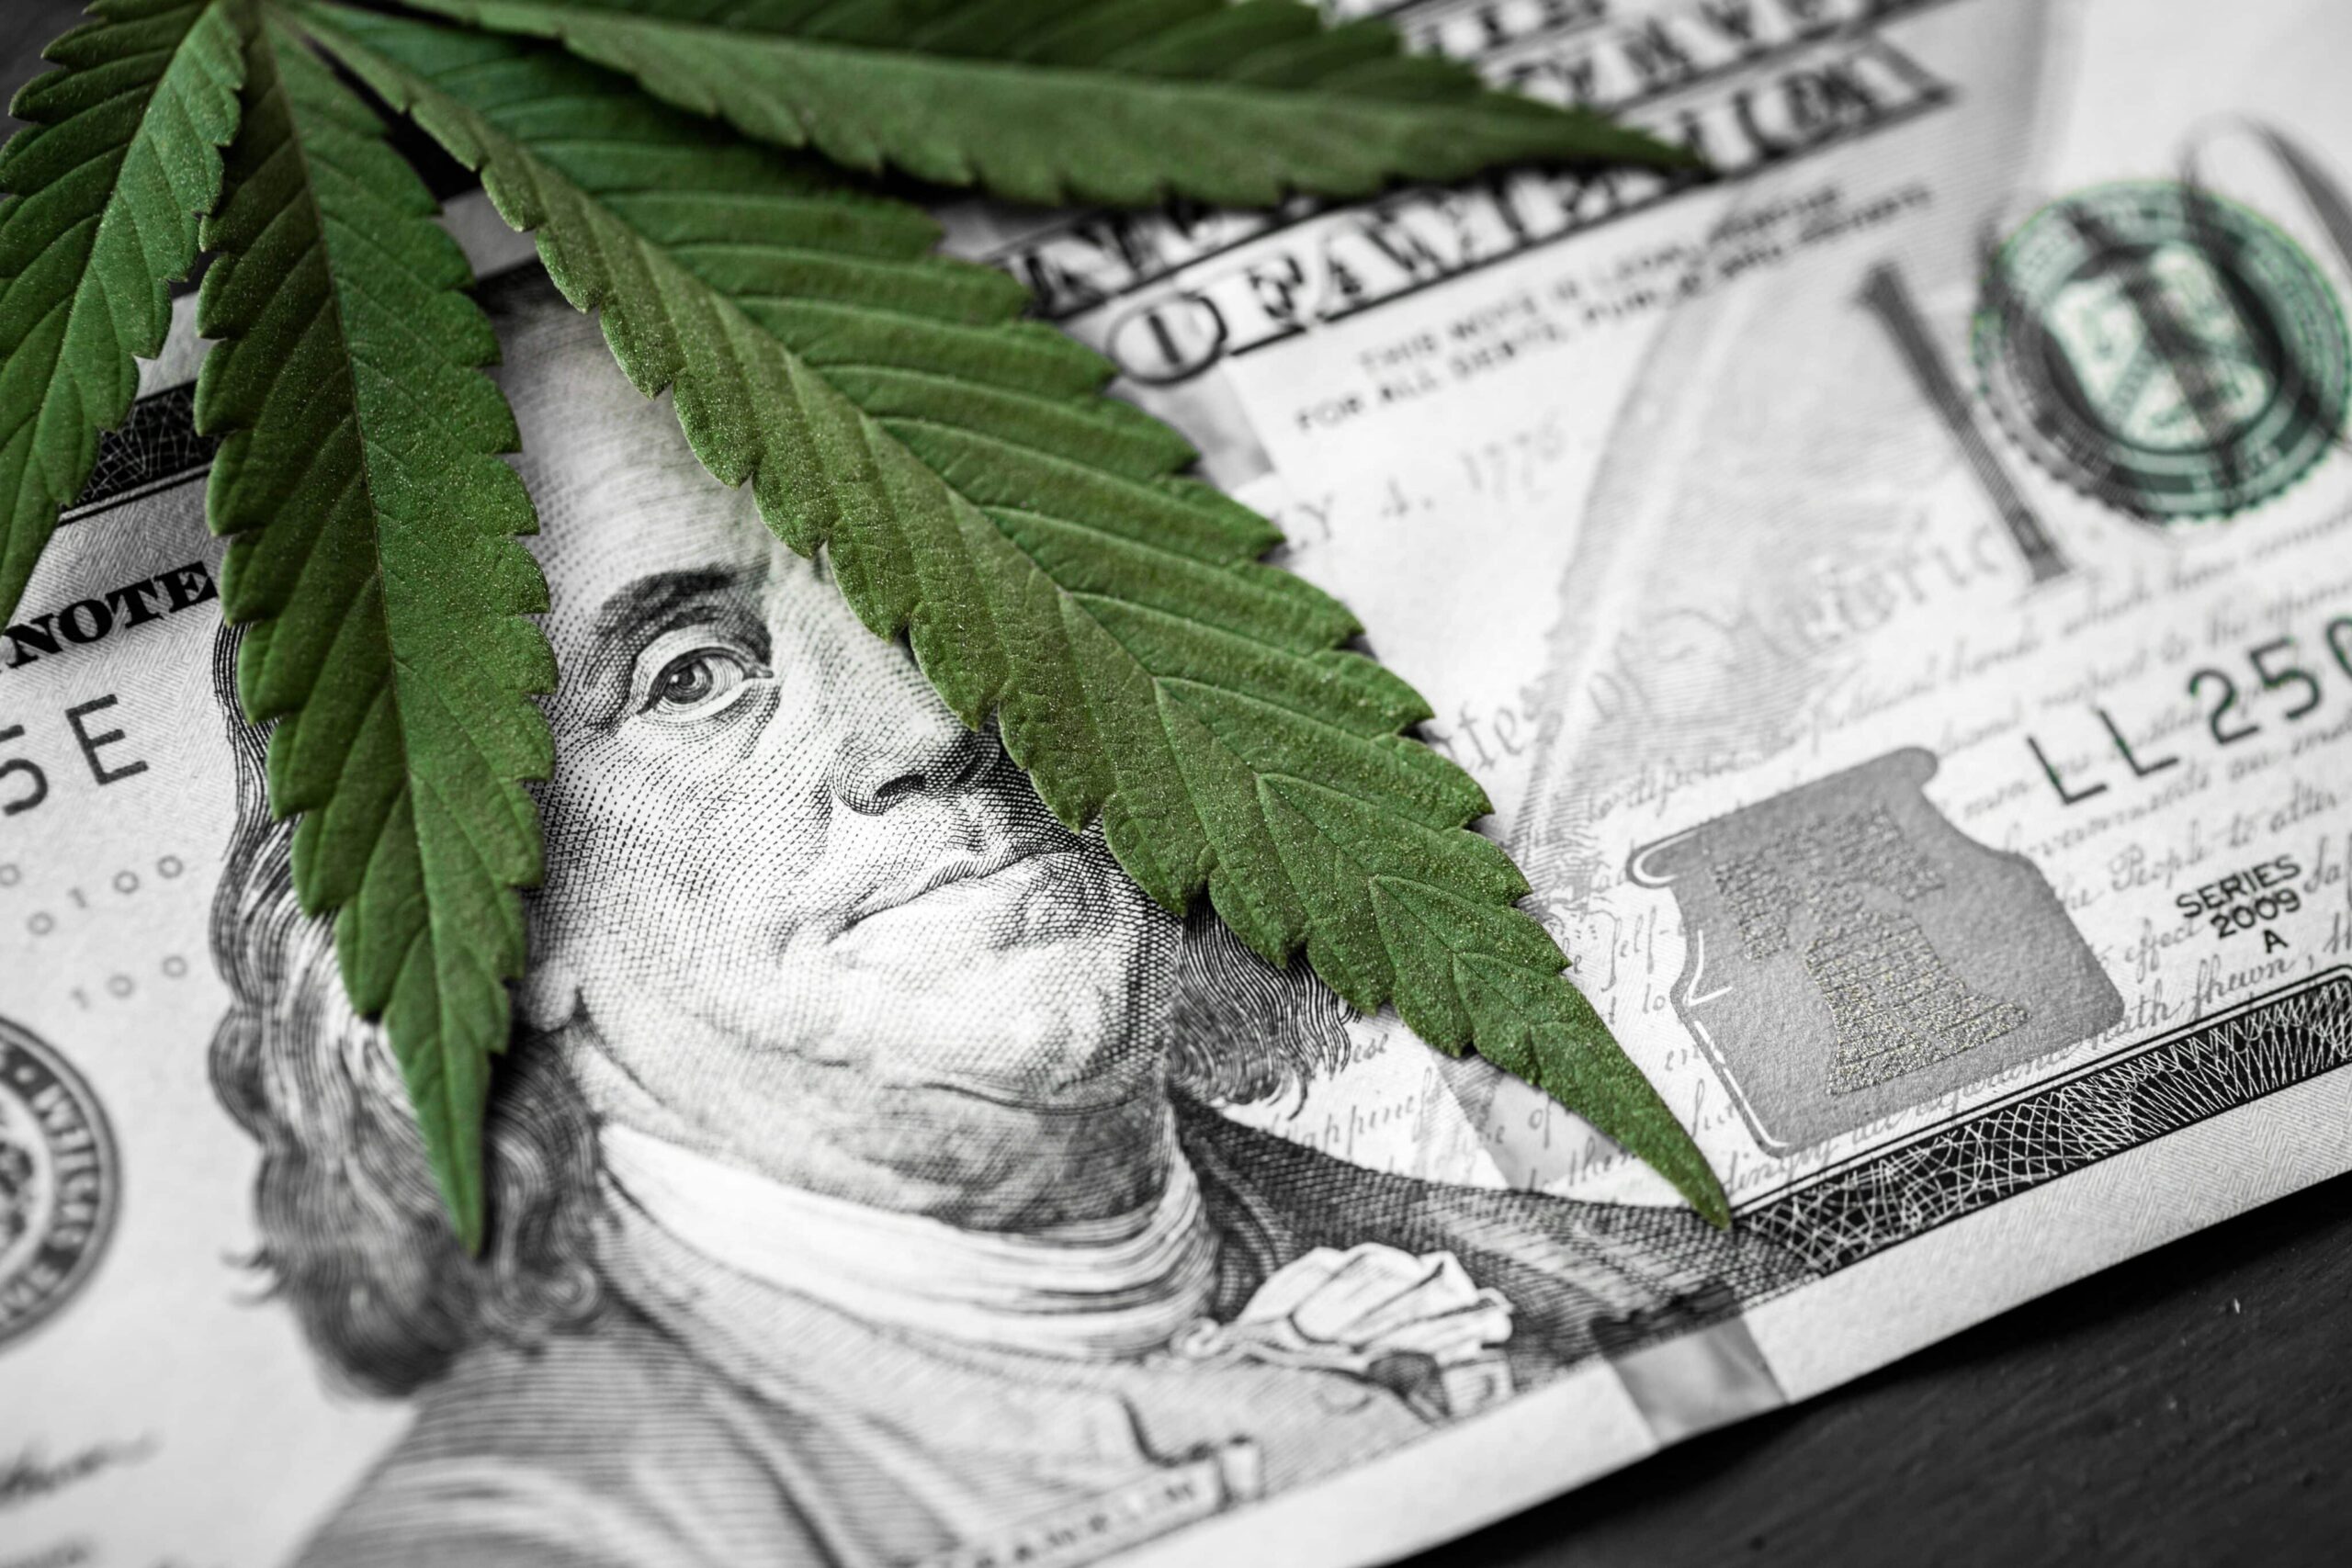 California Agency Awards Over $50 Million in Cannabis Tax Funds to 31 Organizations